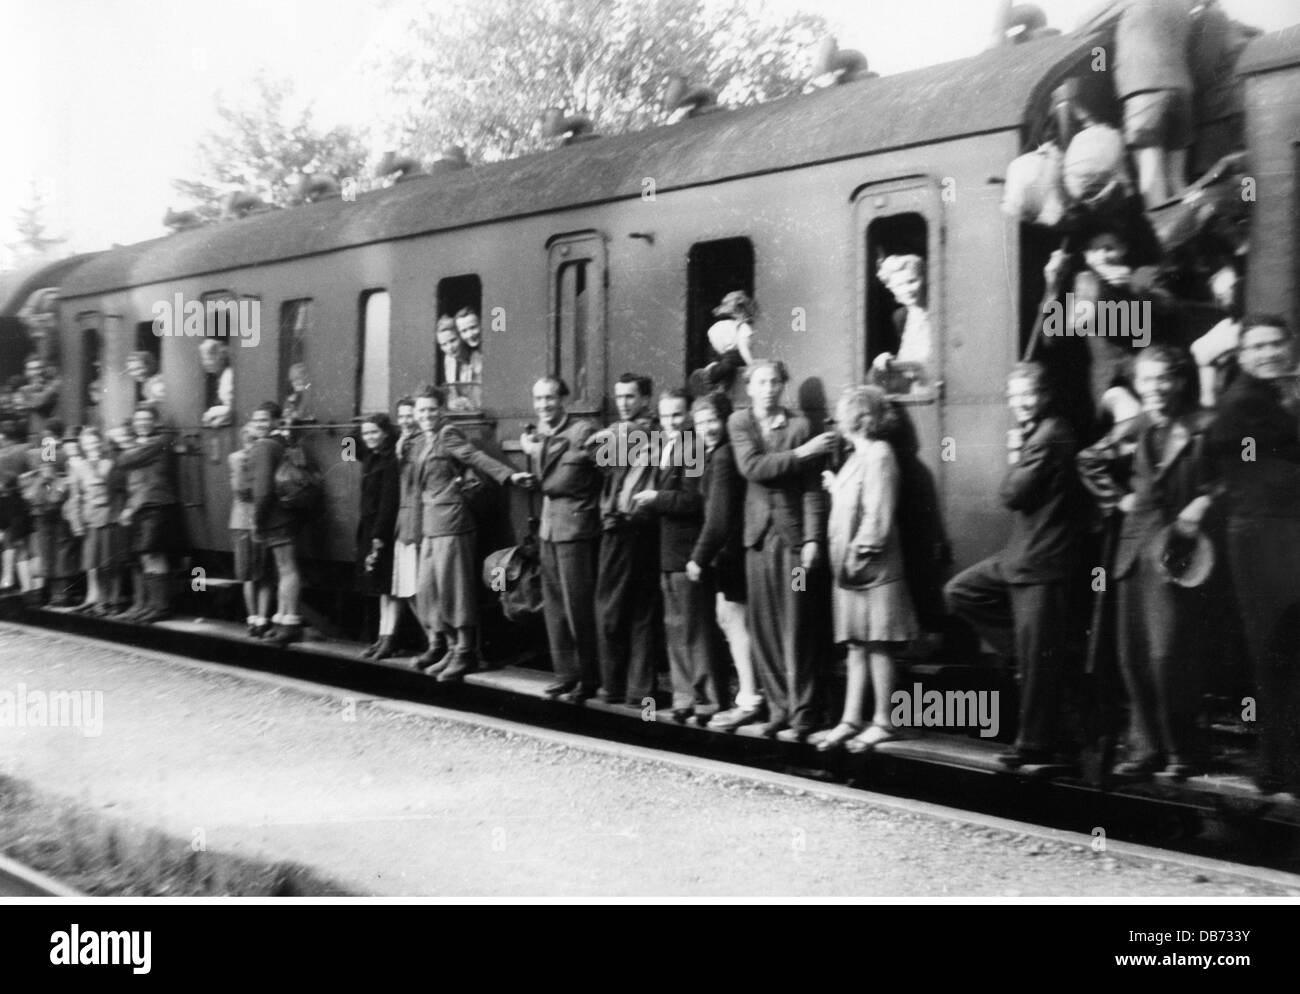 post war period, transport / transportation, Germany, railway, overcrowded wagon, May 1947, Additional-Rights-Clearences-Not Available Stock Photo